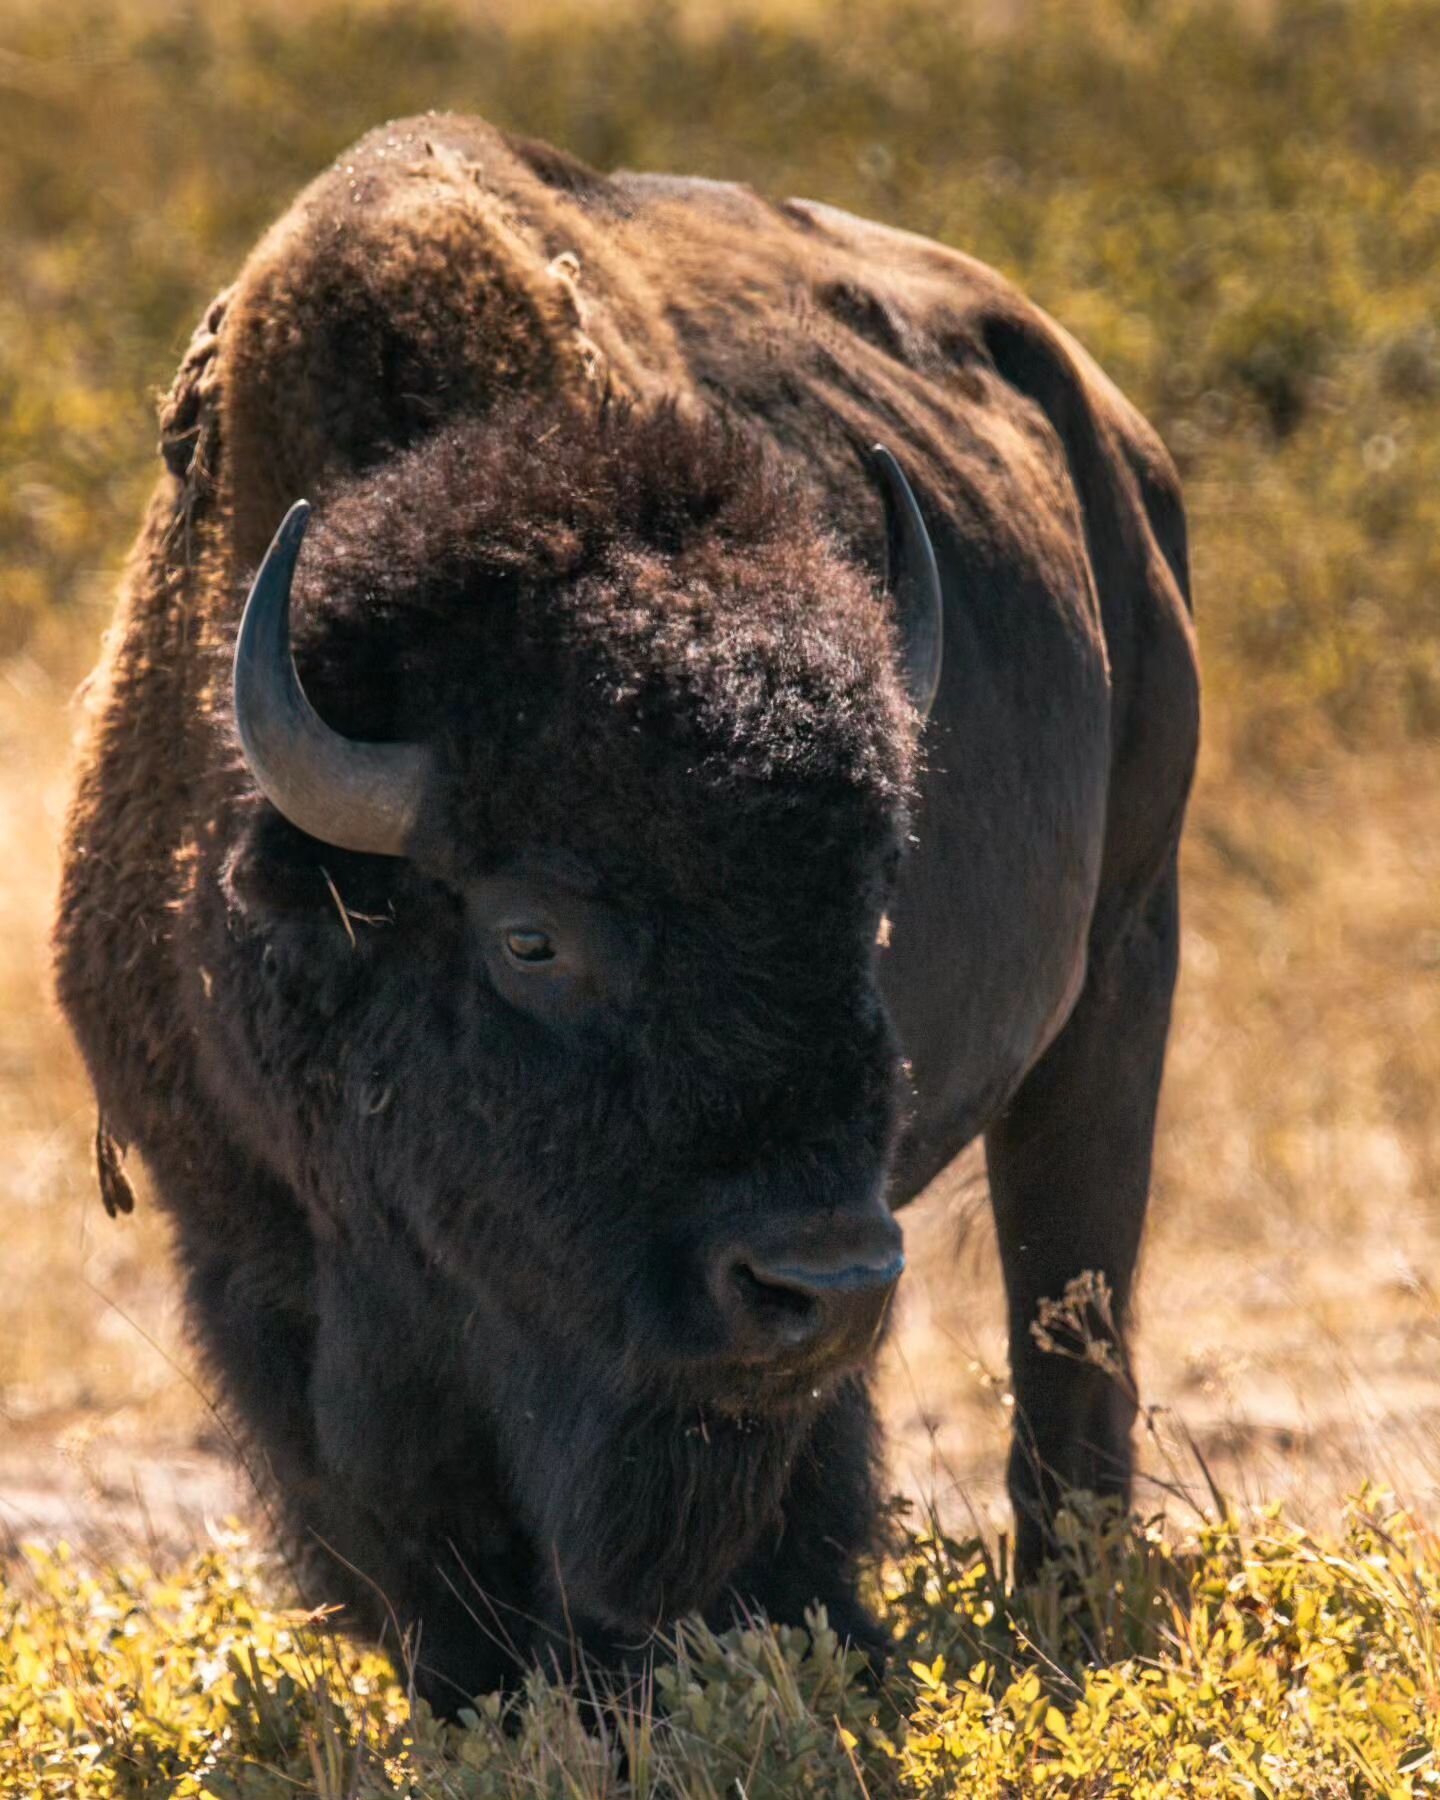 I went for a quick little adventure this weekend to shoot some content mostly focused on wildlife.  It was a productive trip that started with some nice poses from the Bison herd.